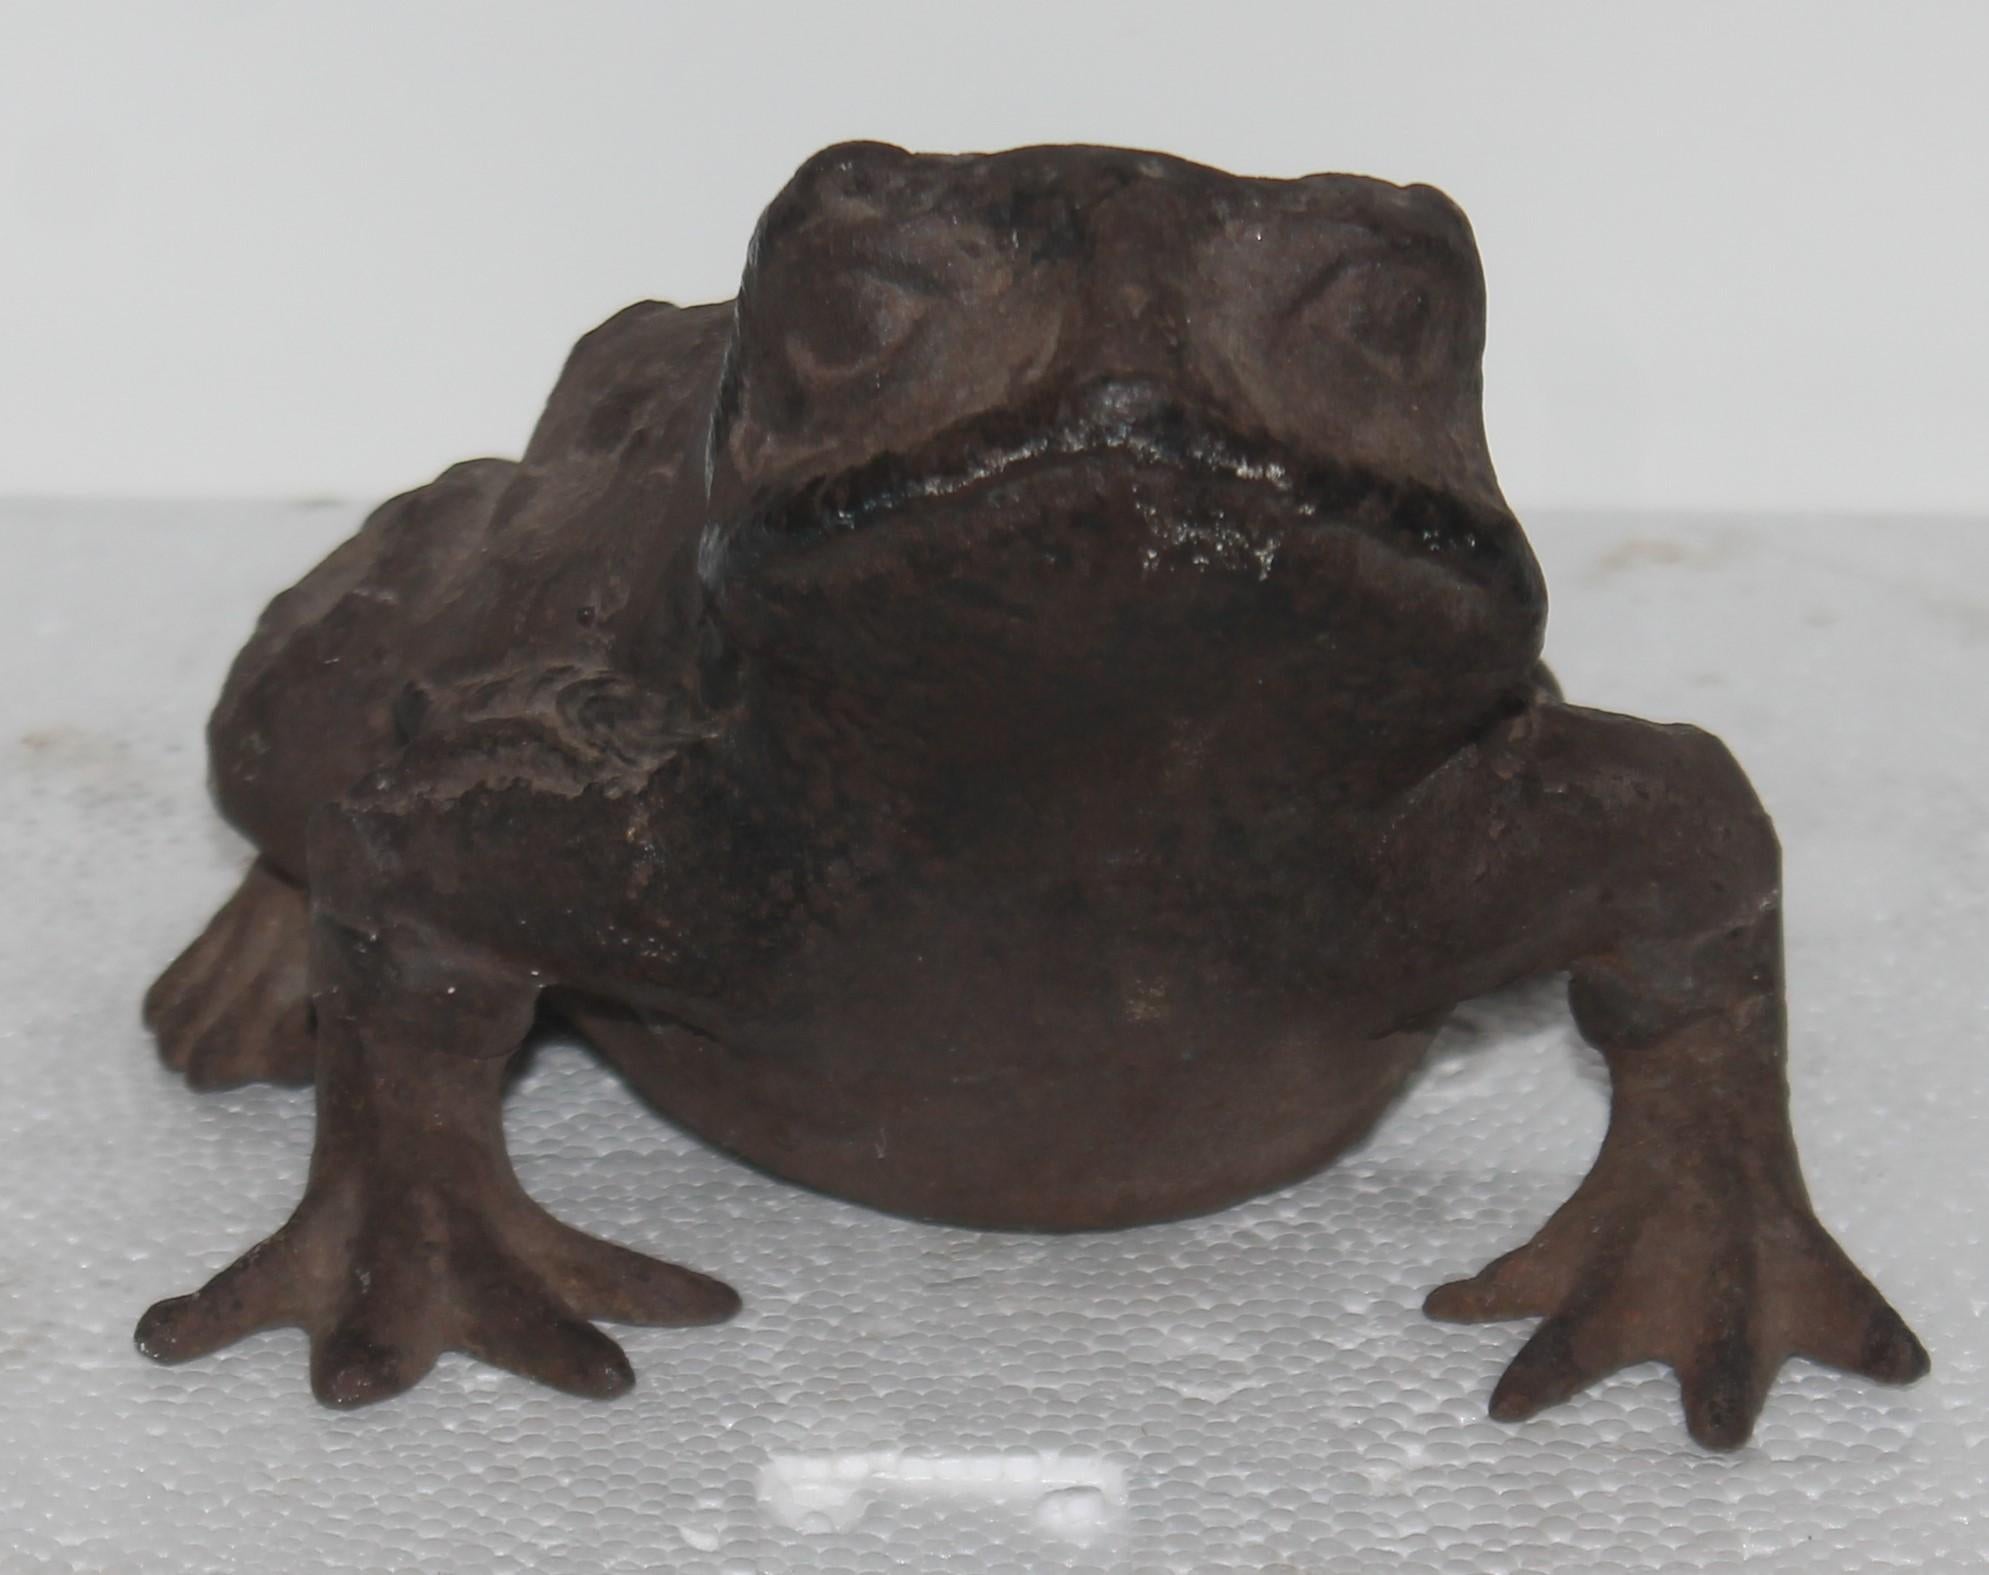 This amazing hand cast iron frog has great weight and great Folk Art too. The condition is very good.